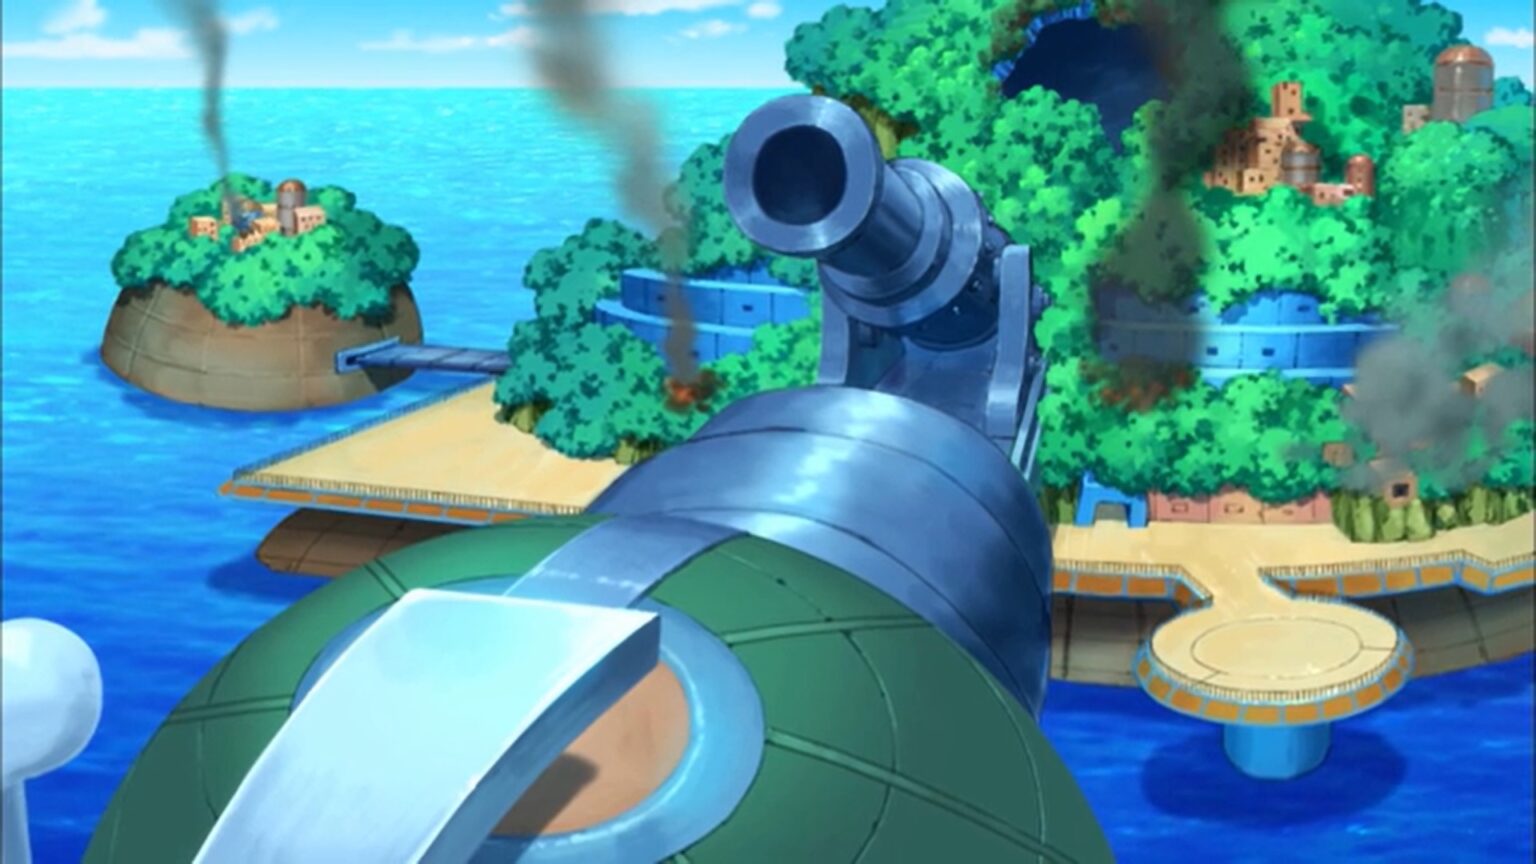 The World of One Piece is filled with lethal weapons.